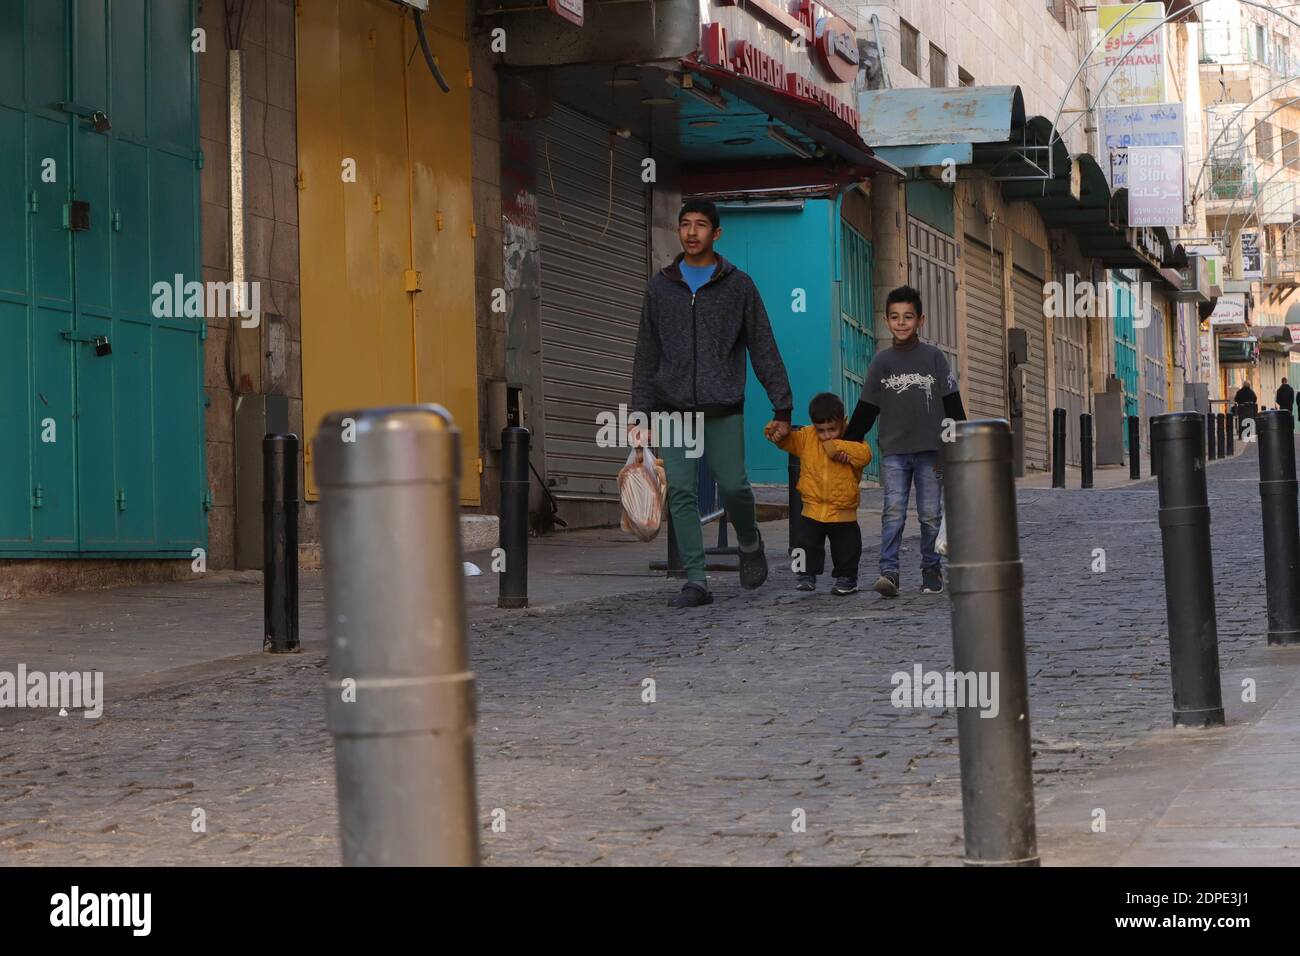 Bethlehem. 19th Dec, 2020. Palestinians walk on a street in the West Bank city of Bethlehem amid a lockdown, on Dec. 19, 2020. A full lockdown and curfew have been imposed in the West Bank and the Gaza Strip to curb the growing numbers of COVID-19 infections and deaths. Credit: Mamoun Wazwaz/Xinhua/Alamy Live News Stock Photo